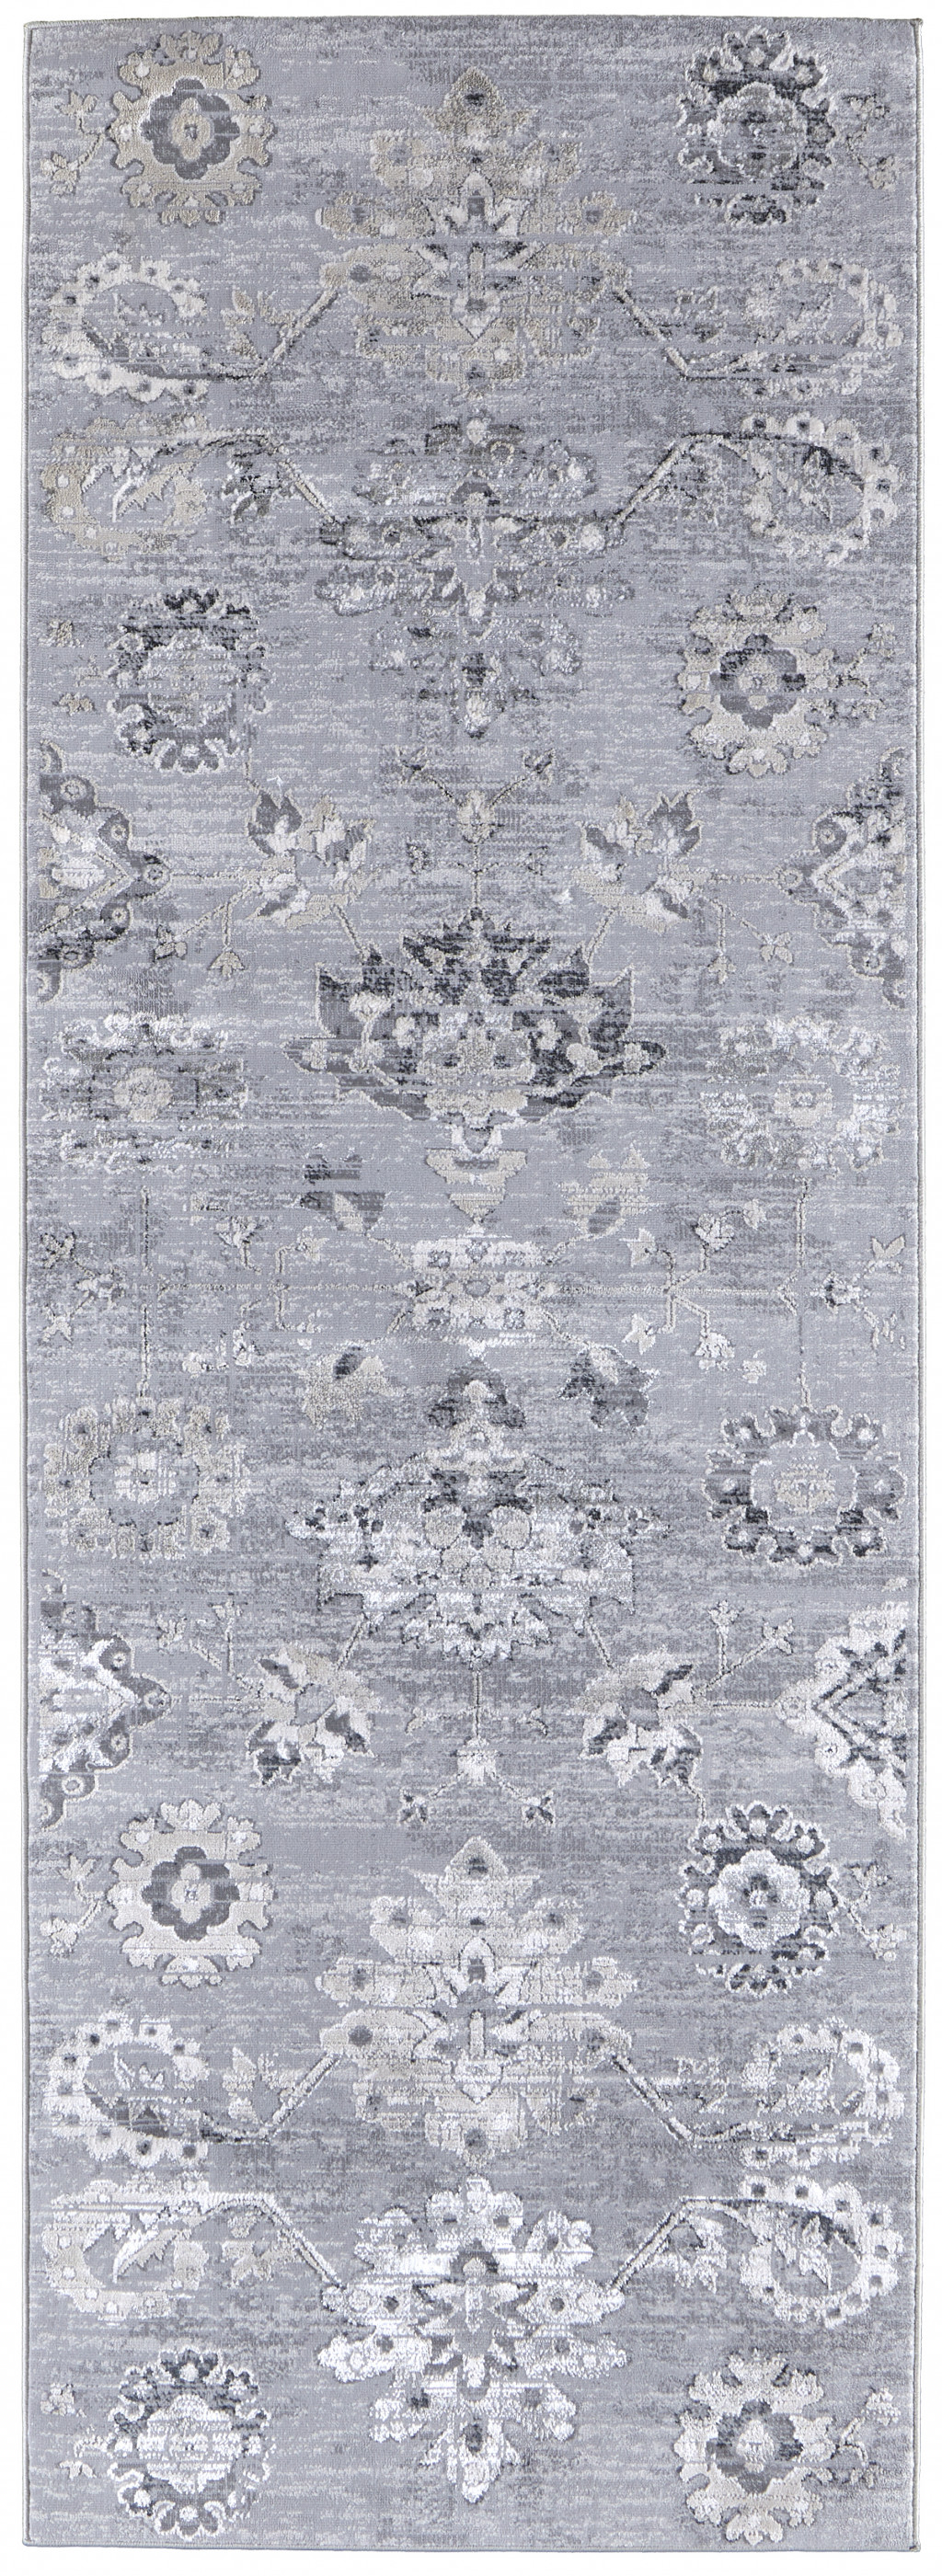 8' Silver And Black Floral Power Loom Distressed Runner Rug-514287-1